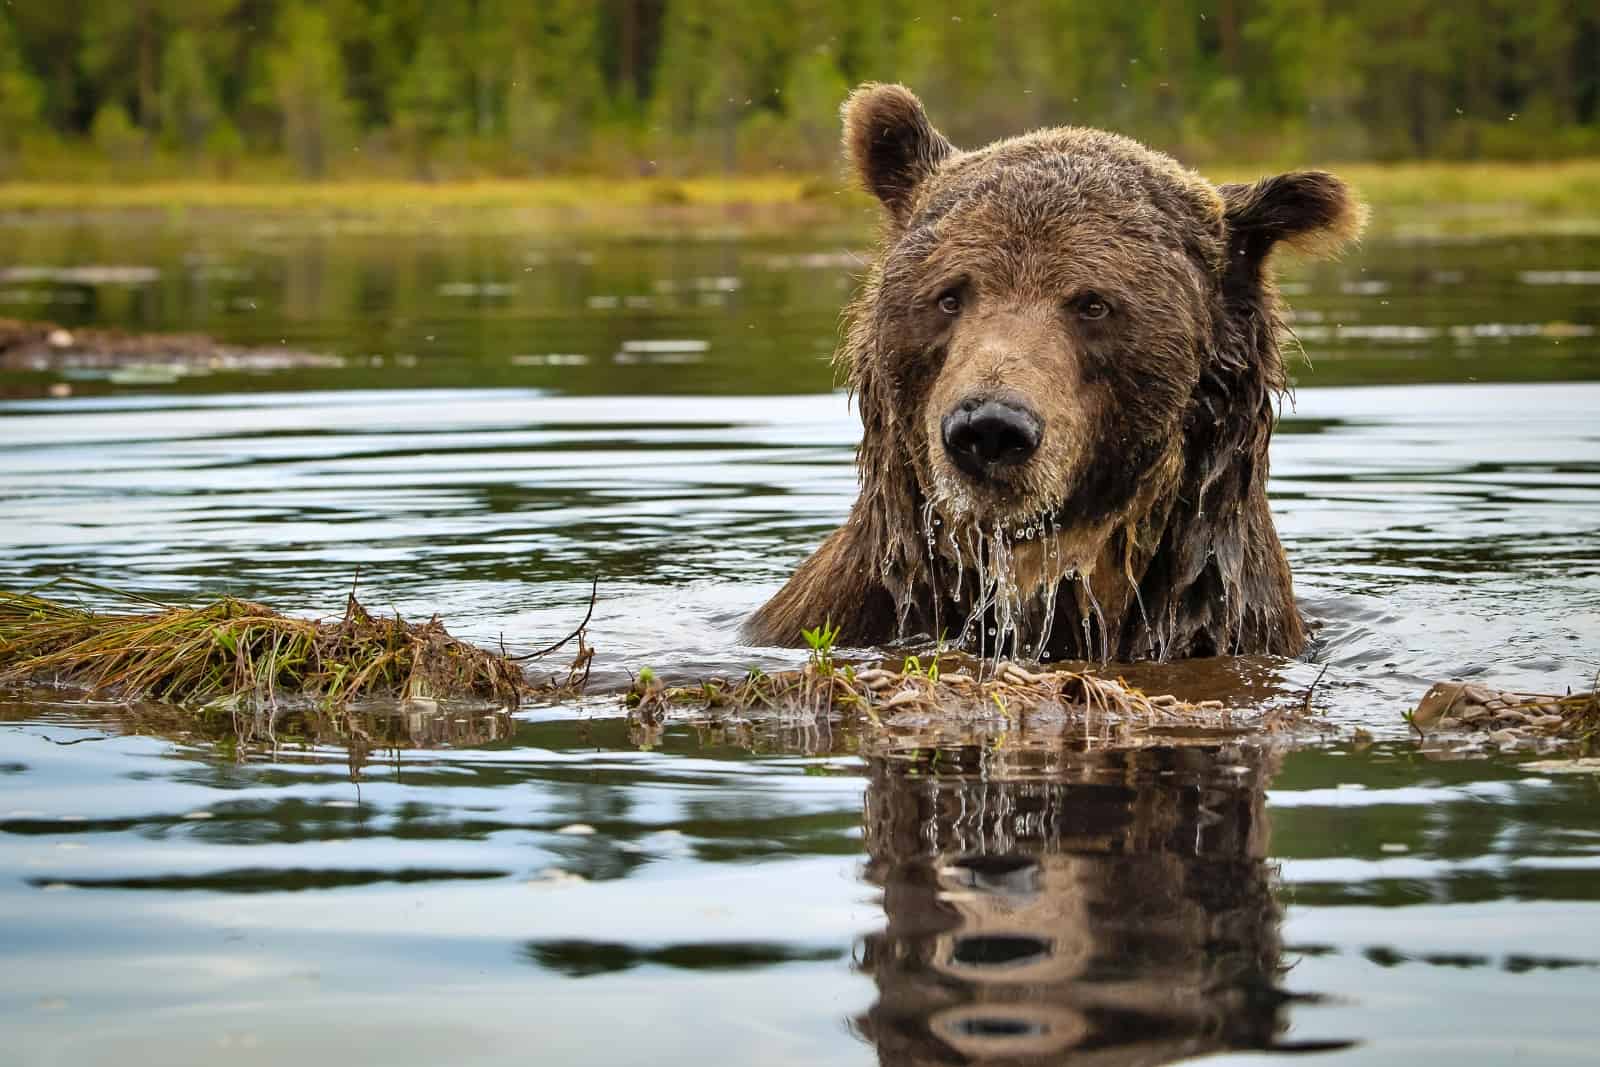 How can brown bears live alongside humans?